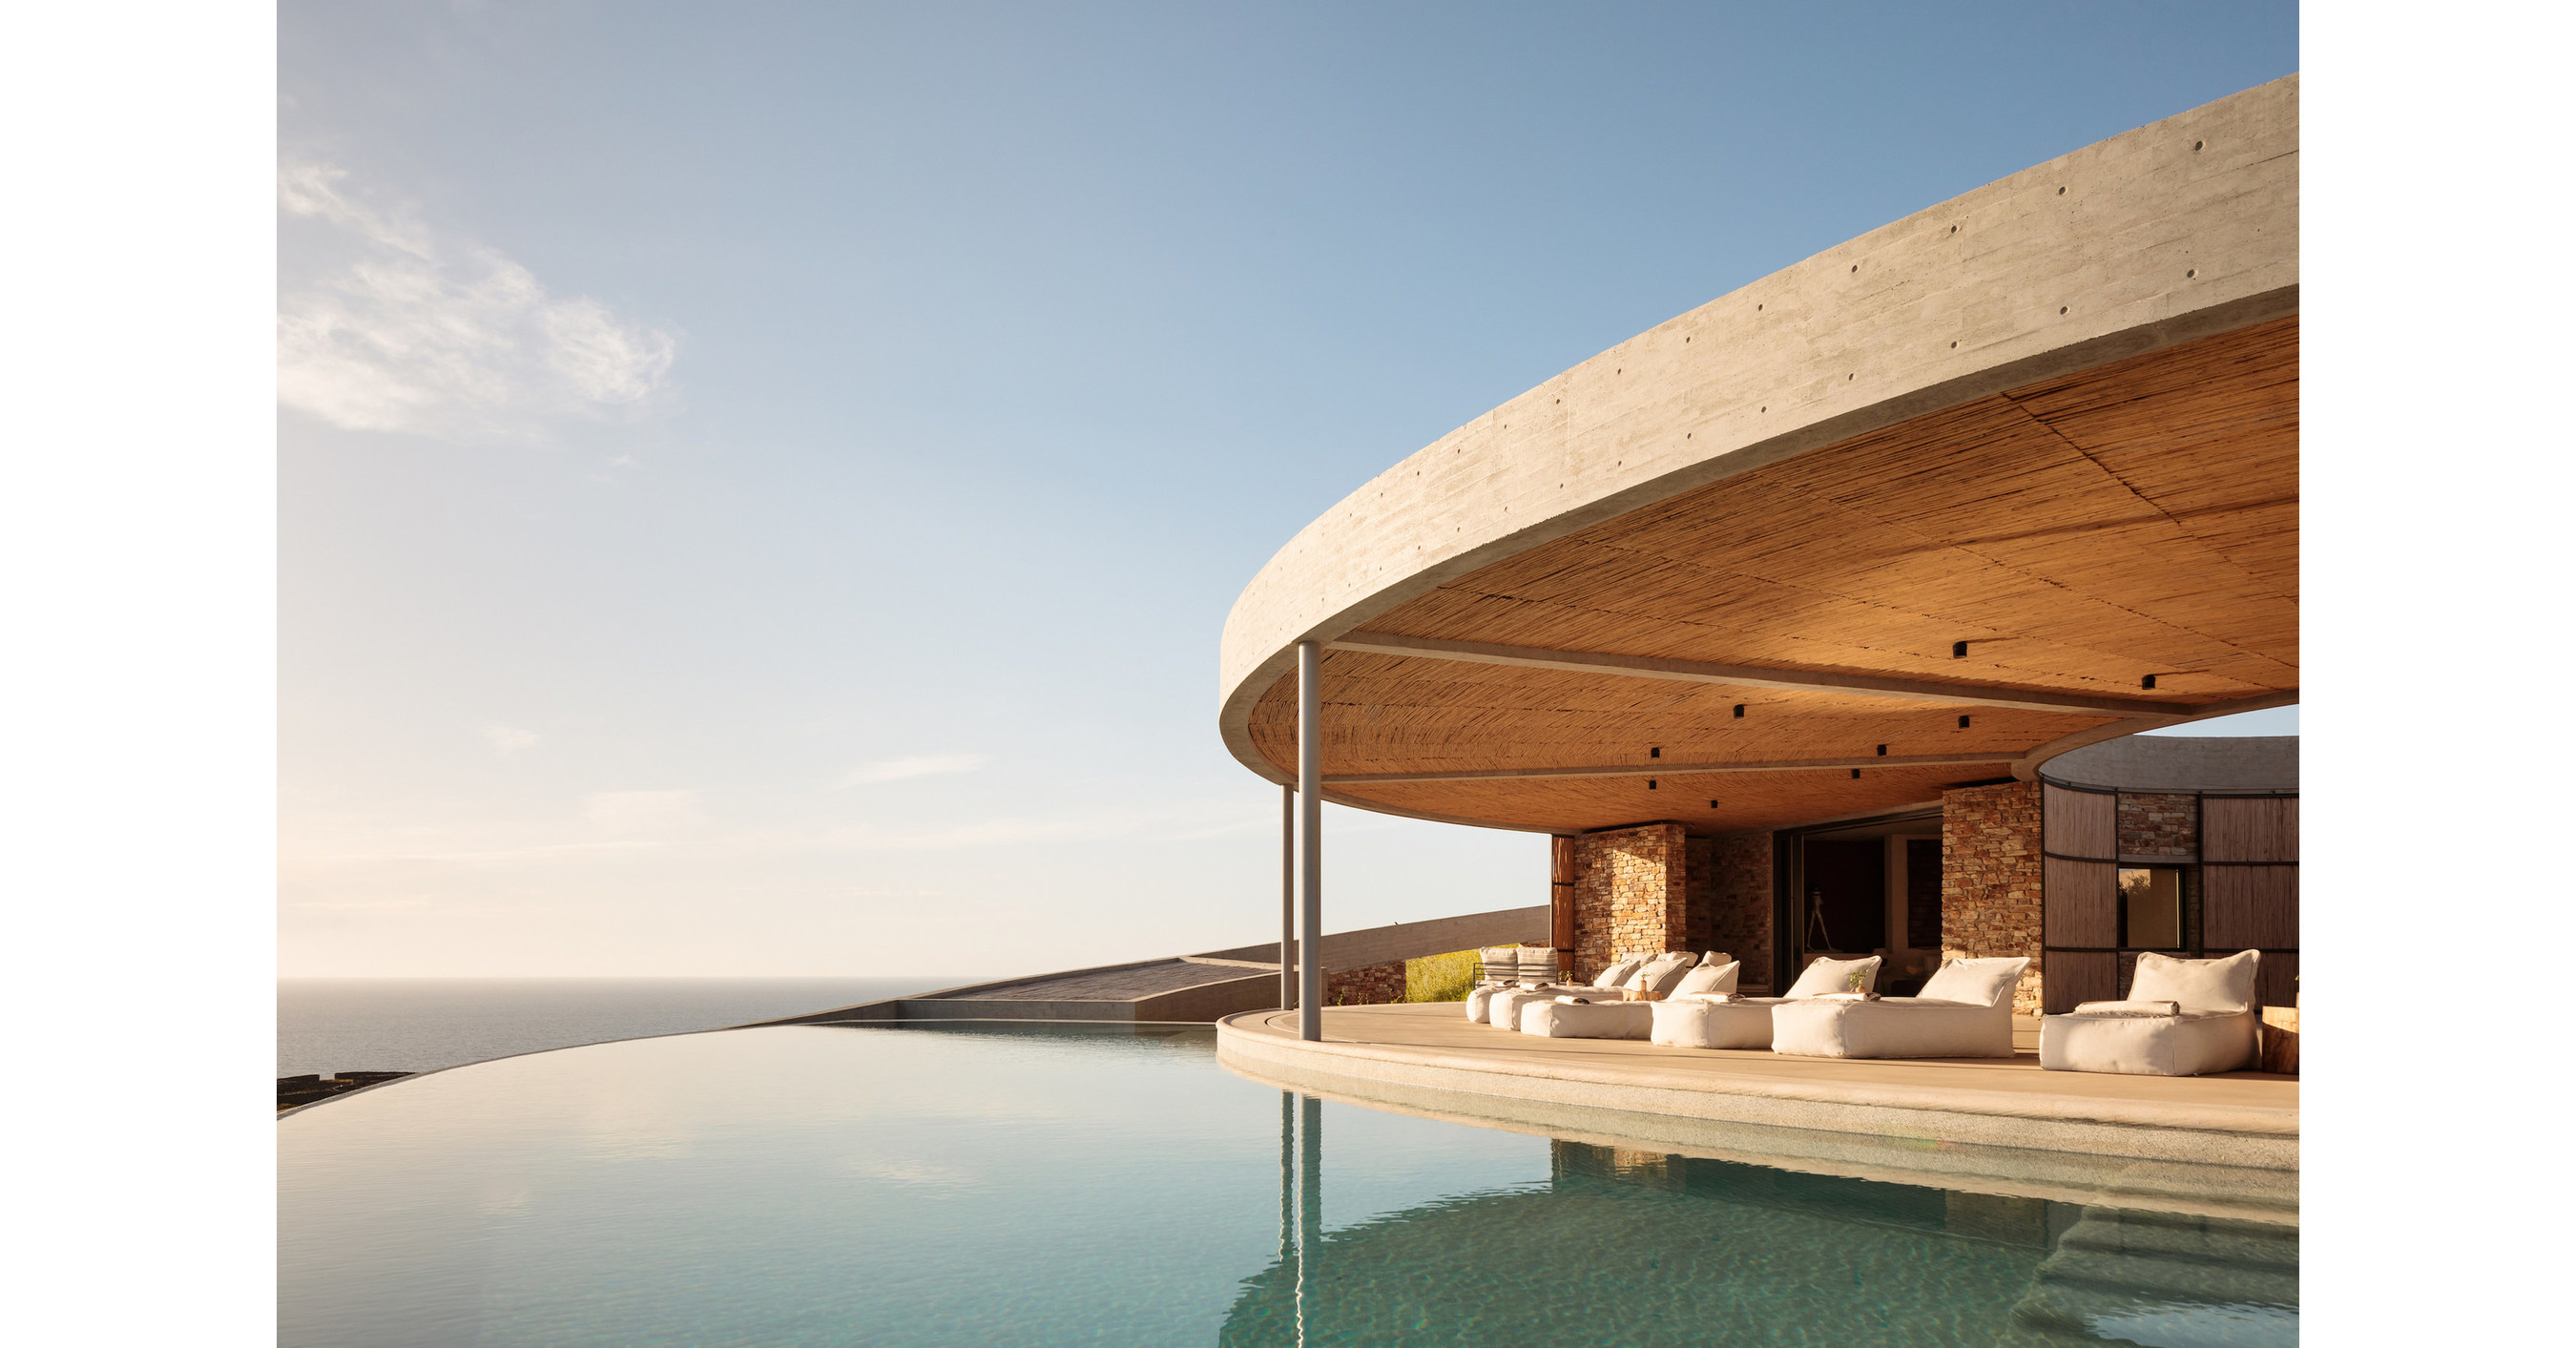 A record year for luxury property sales in the Greek market